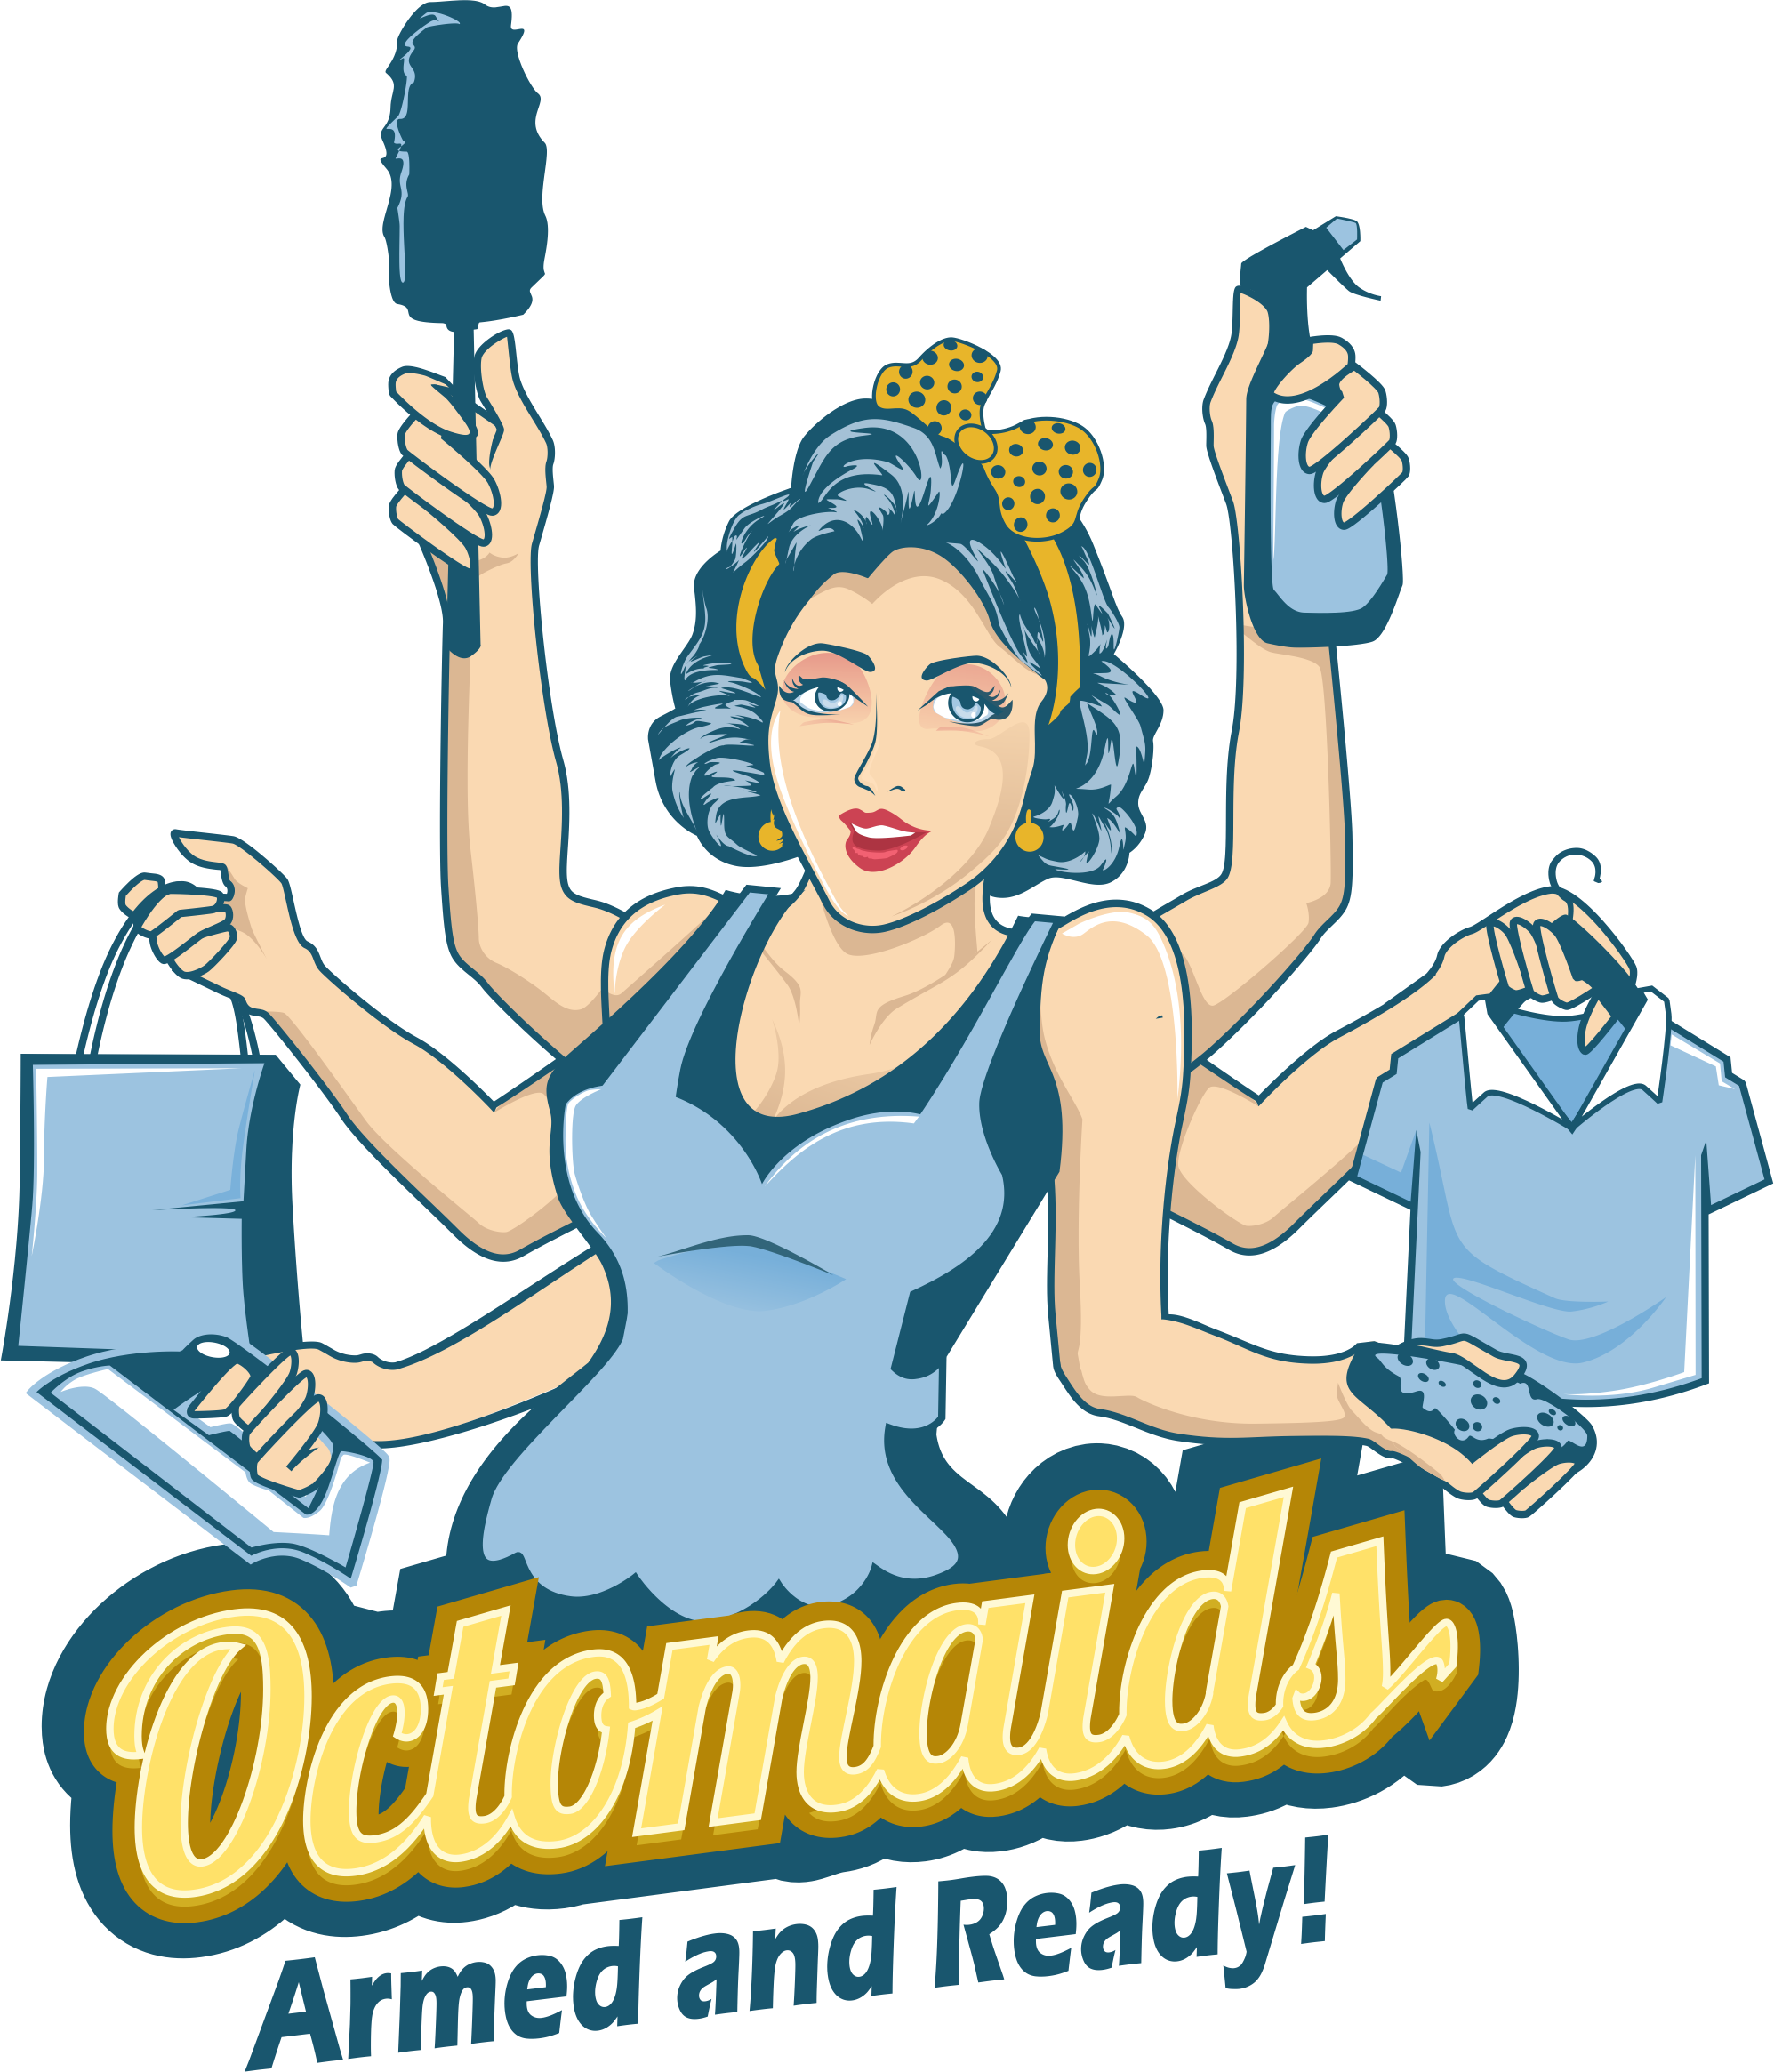 Octomaids cleaning service